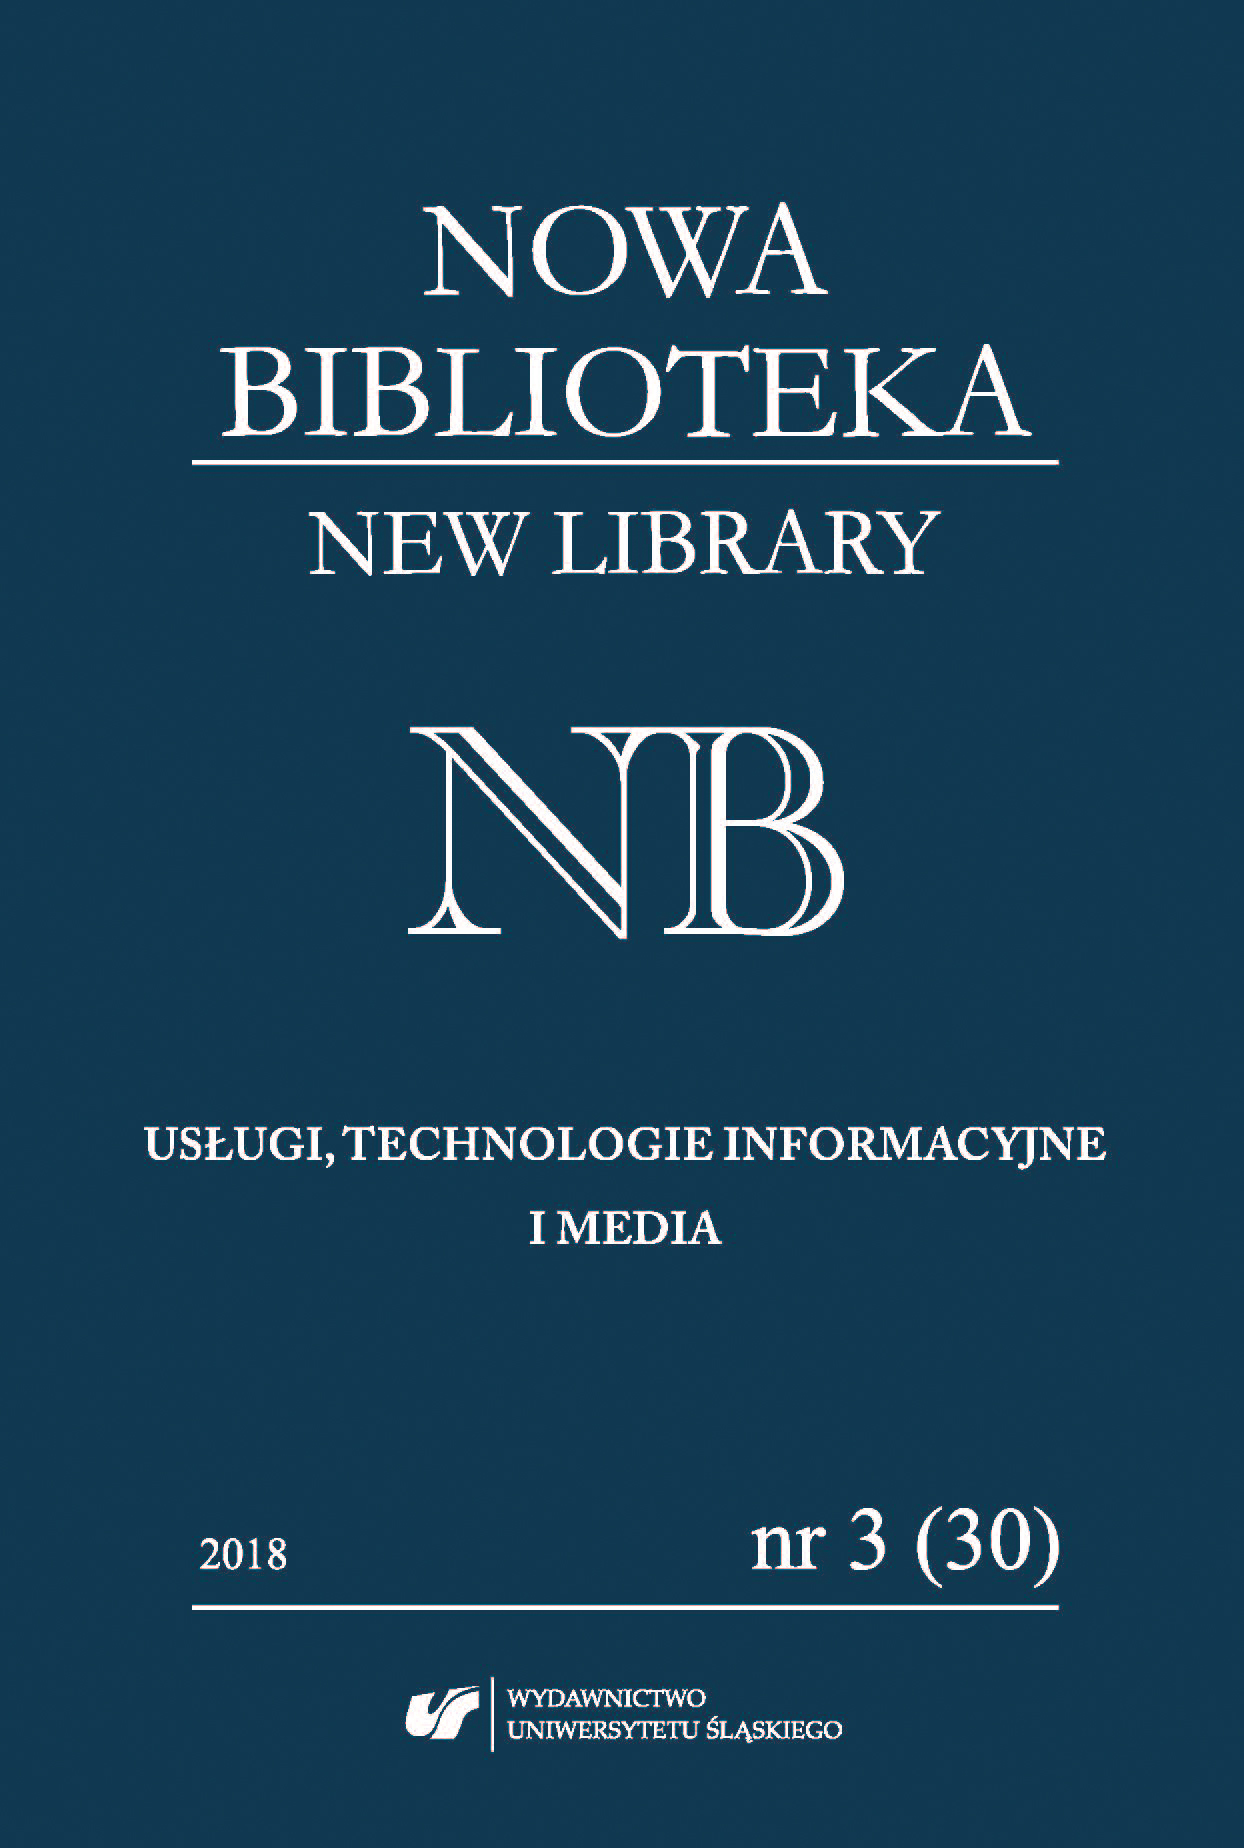 The activities of the Regional Bibliography Team for the popularisation of knowledge about the region Cover Image